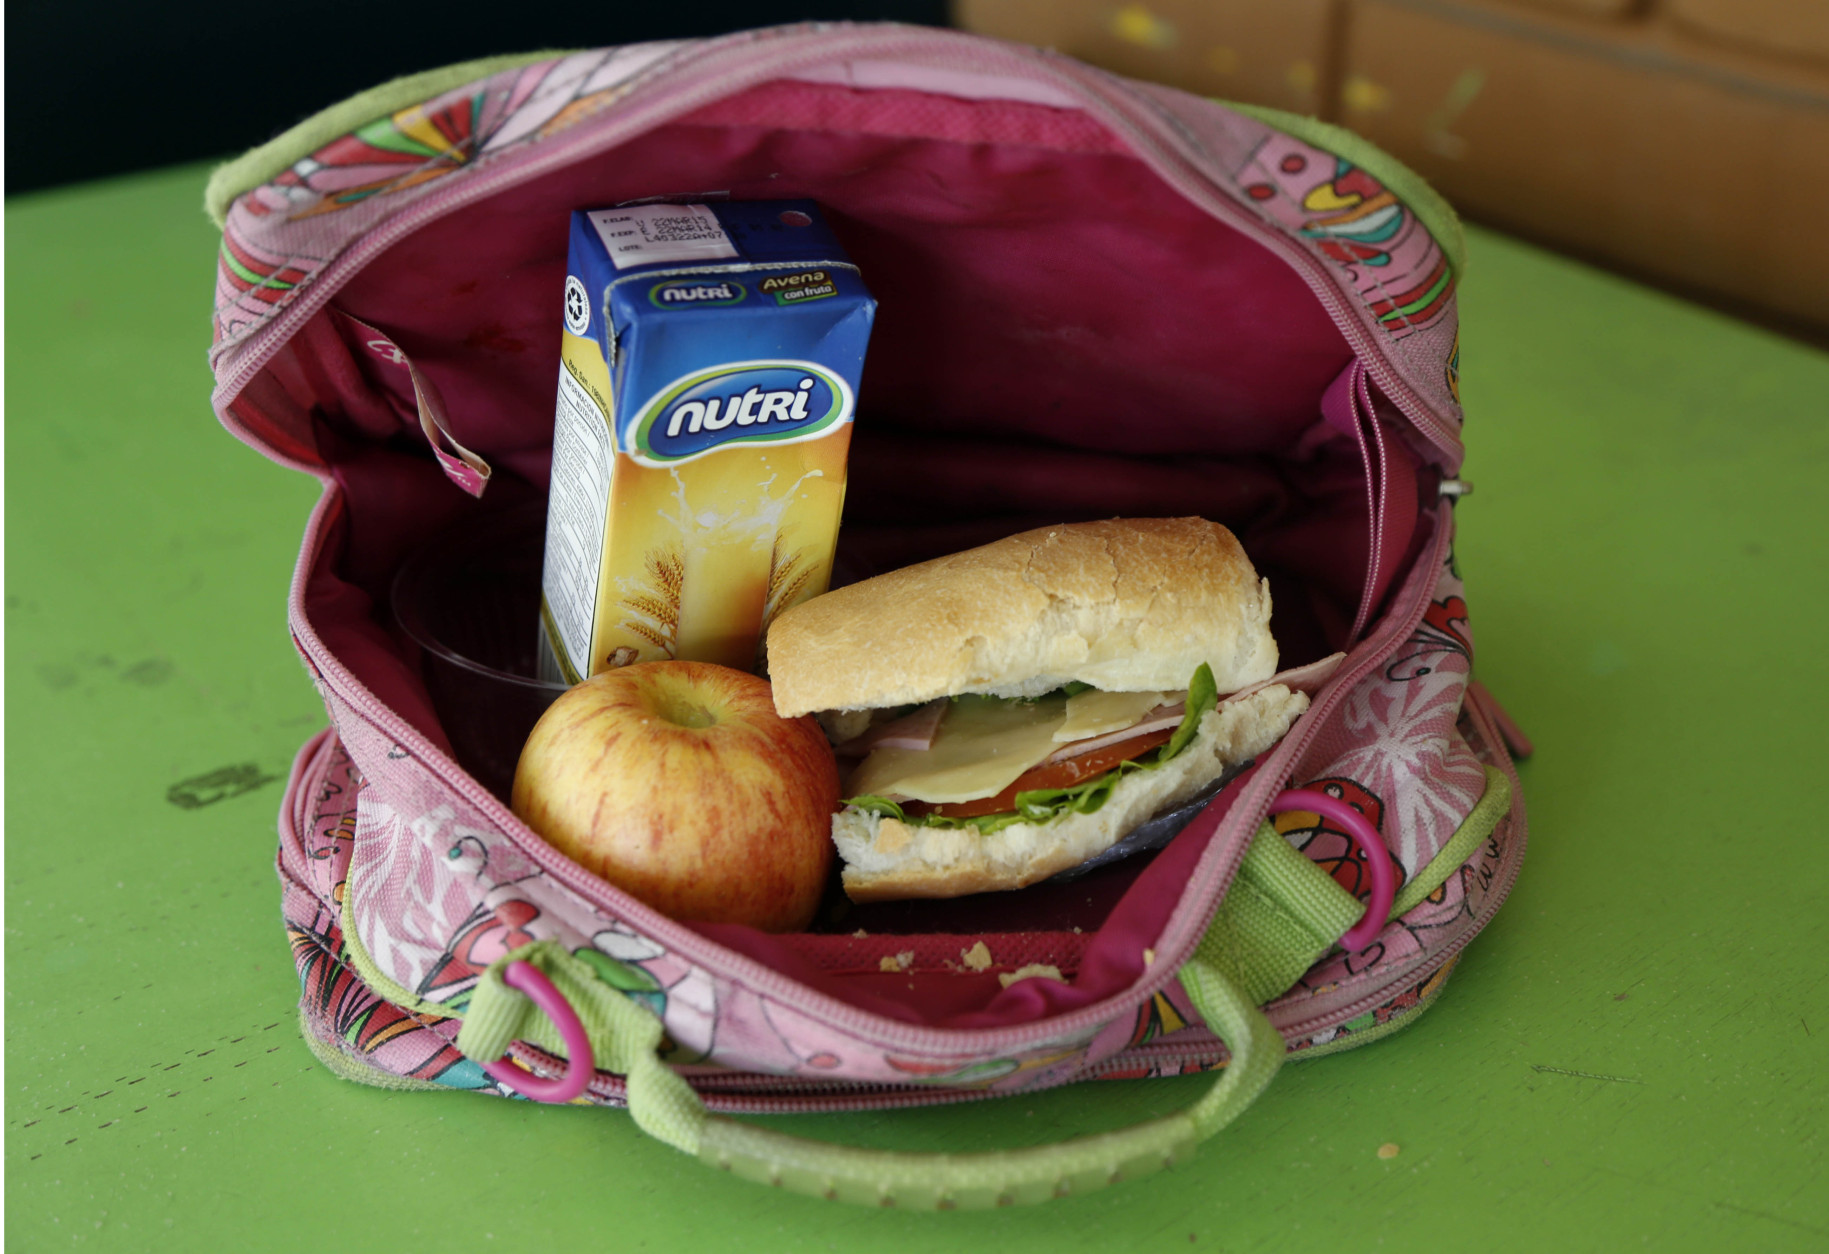 A student's lunch box brought from home sits on display at an elementary school in Quito, Ecuador, Tuesday, May 6, 2014. The lunch consists of a sandwich of ham, cheese, tomato and lettuce, a boxed oatmeal drink, and an apple. (AP Photo/Dolores Ochoa)